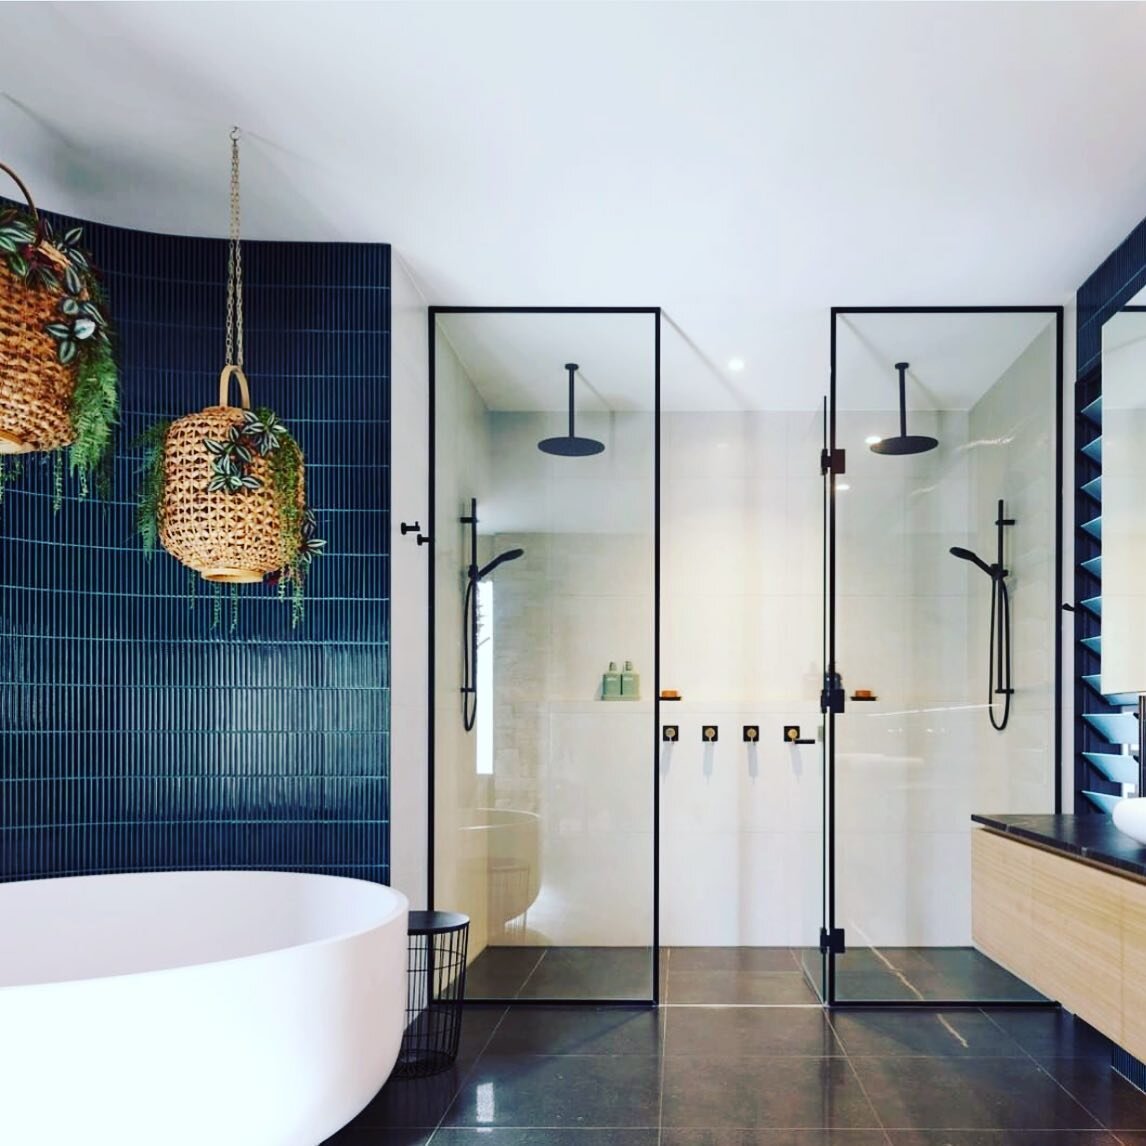 One of our epic shower enclosure creations 🔥 

Working for designer builders gives us the chance to be creative and keep things interesting ✌️

www.glazeitglassandscreens.com.au 

#showerscreen #custom #bathroominspo #bathroomdesign #glazing #bath #